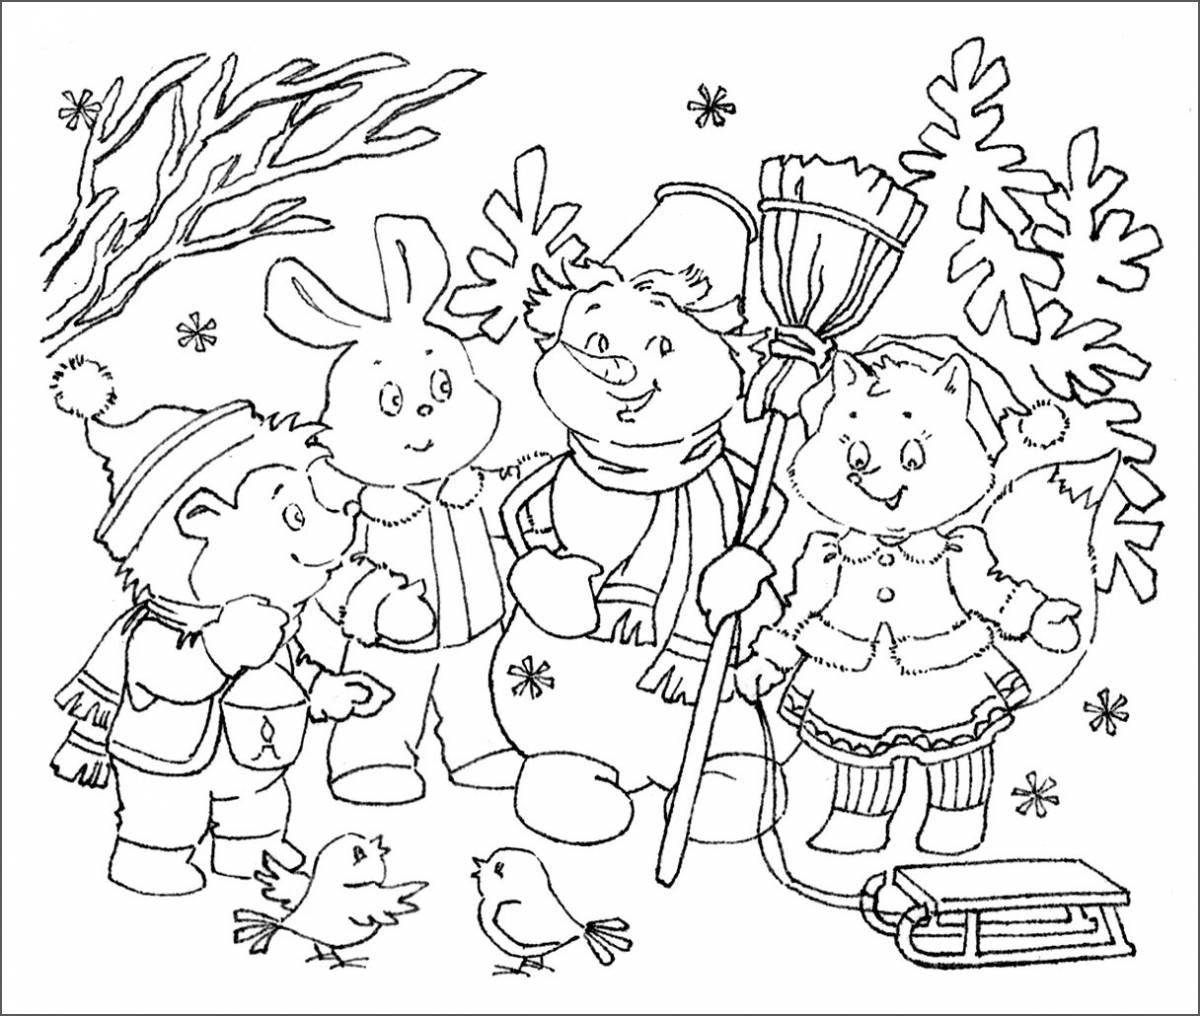 Carol holiday coloring book for 6-7 year olds